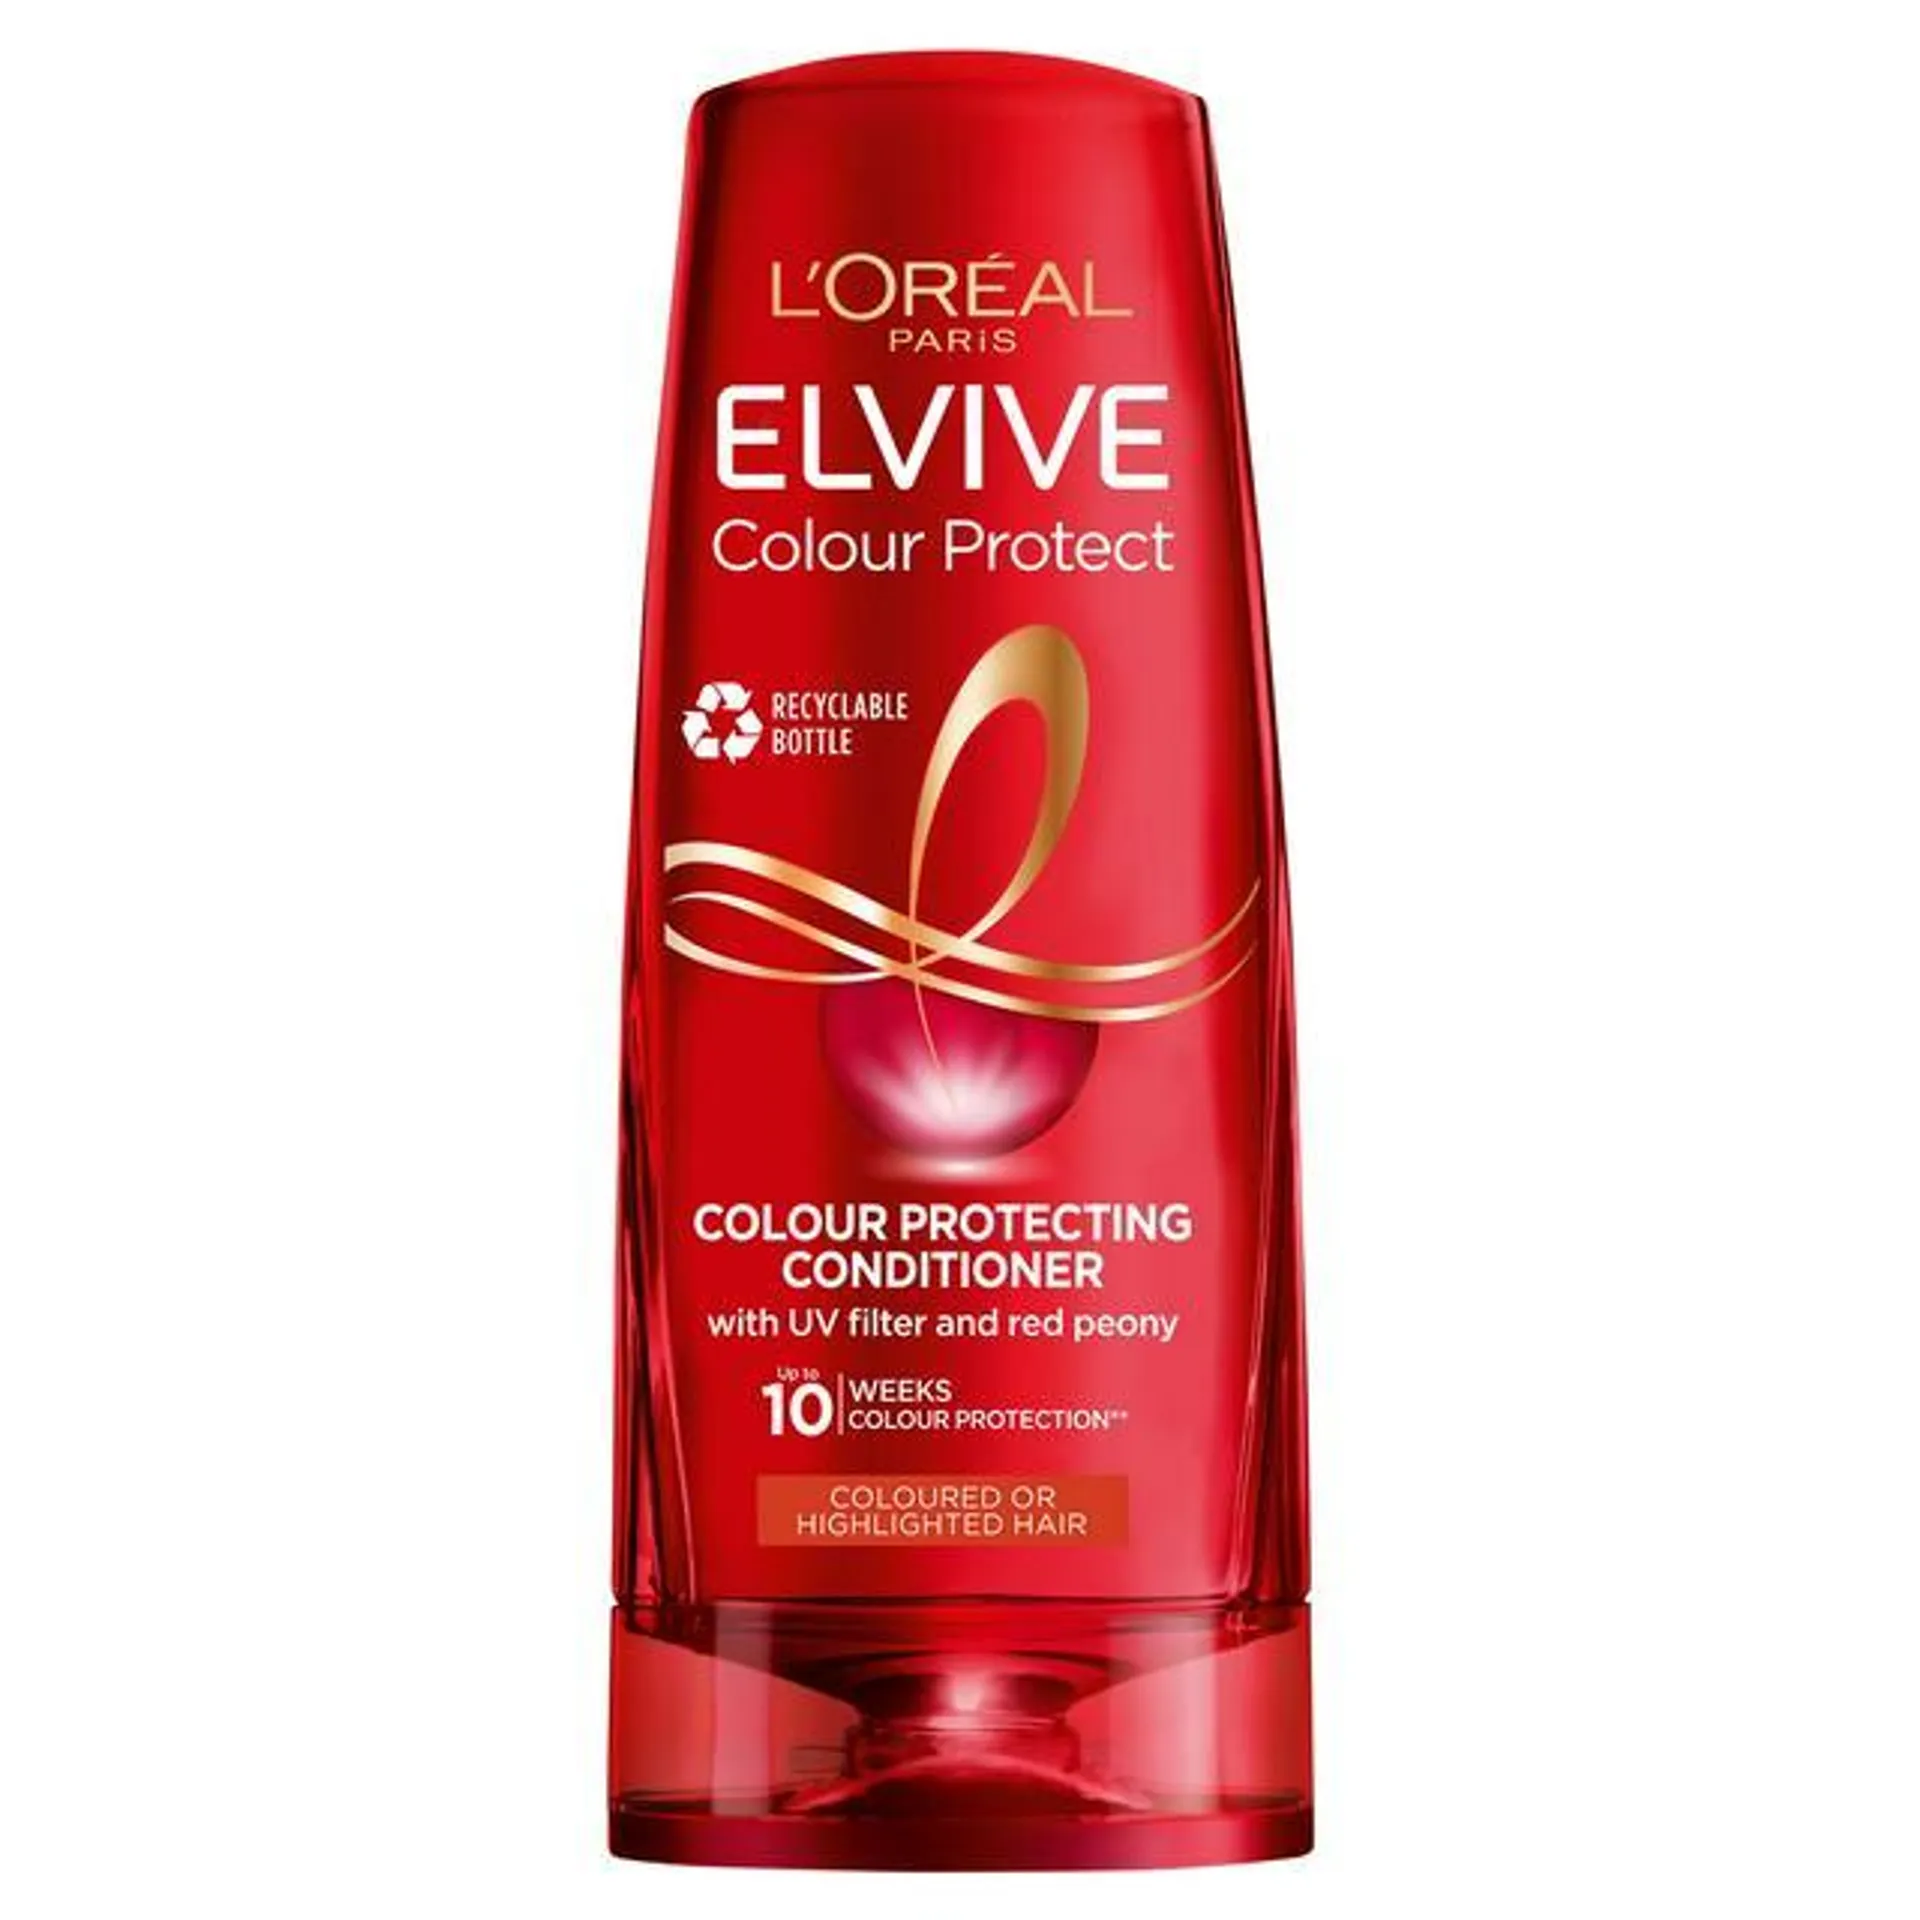 L'Oreal Paris Conditioner by Elvive Colour Protect for Coloured or Highlighted Hair 300ml